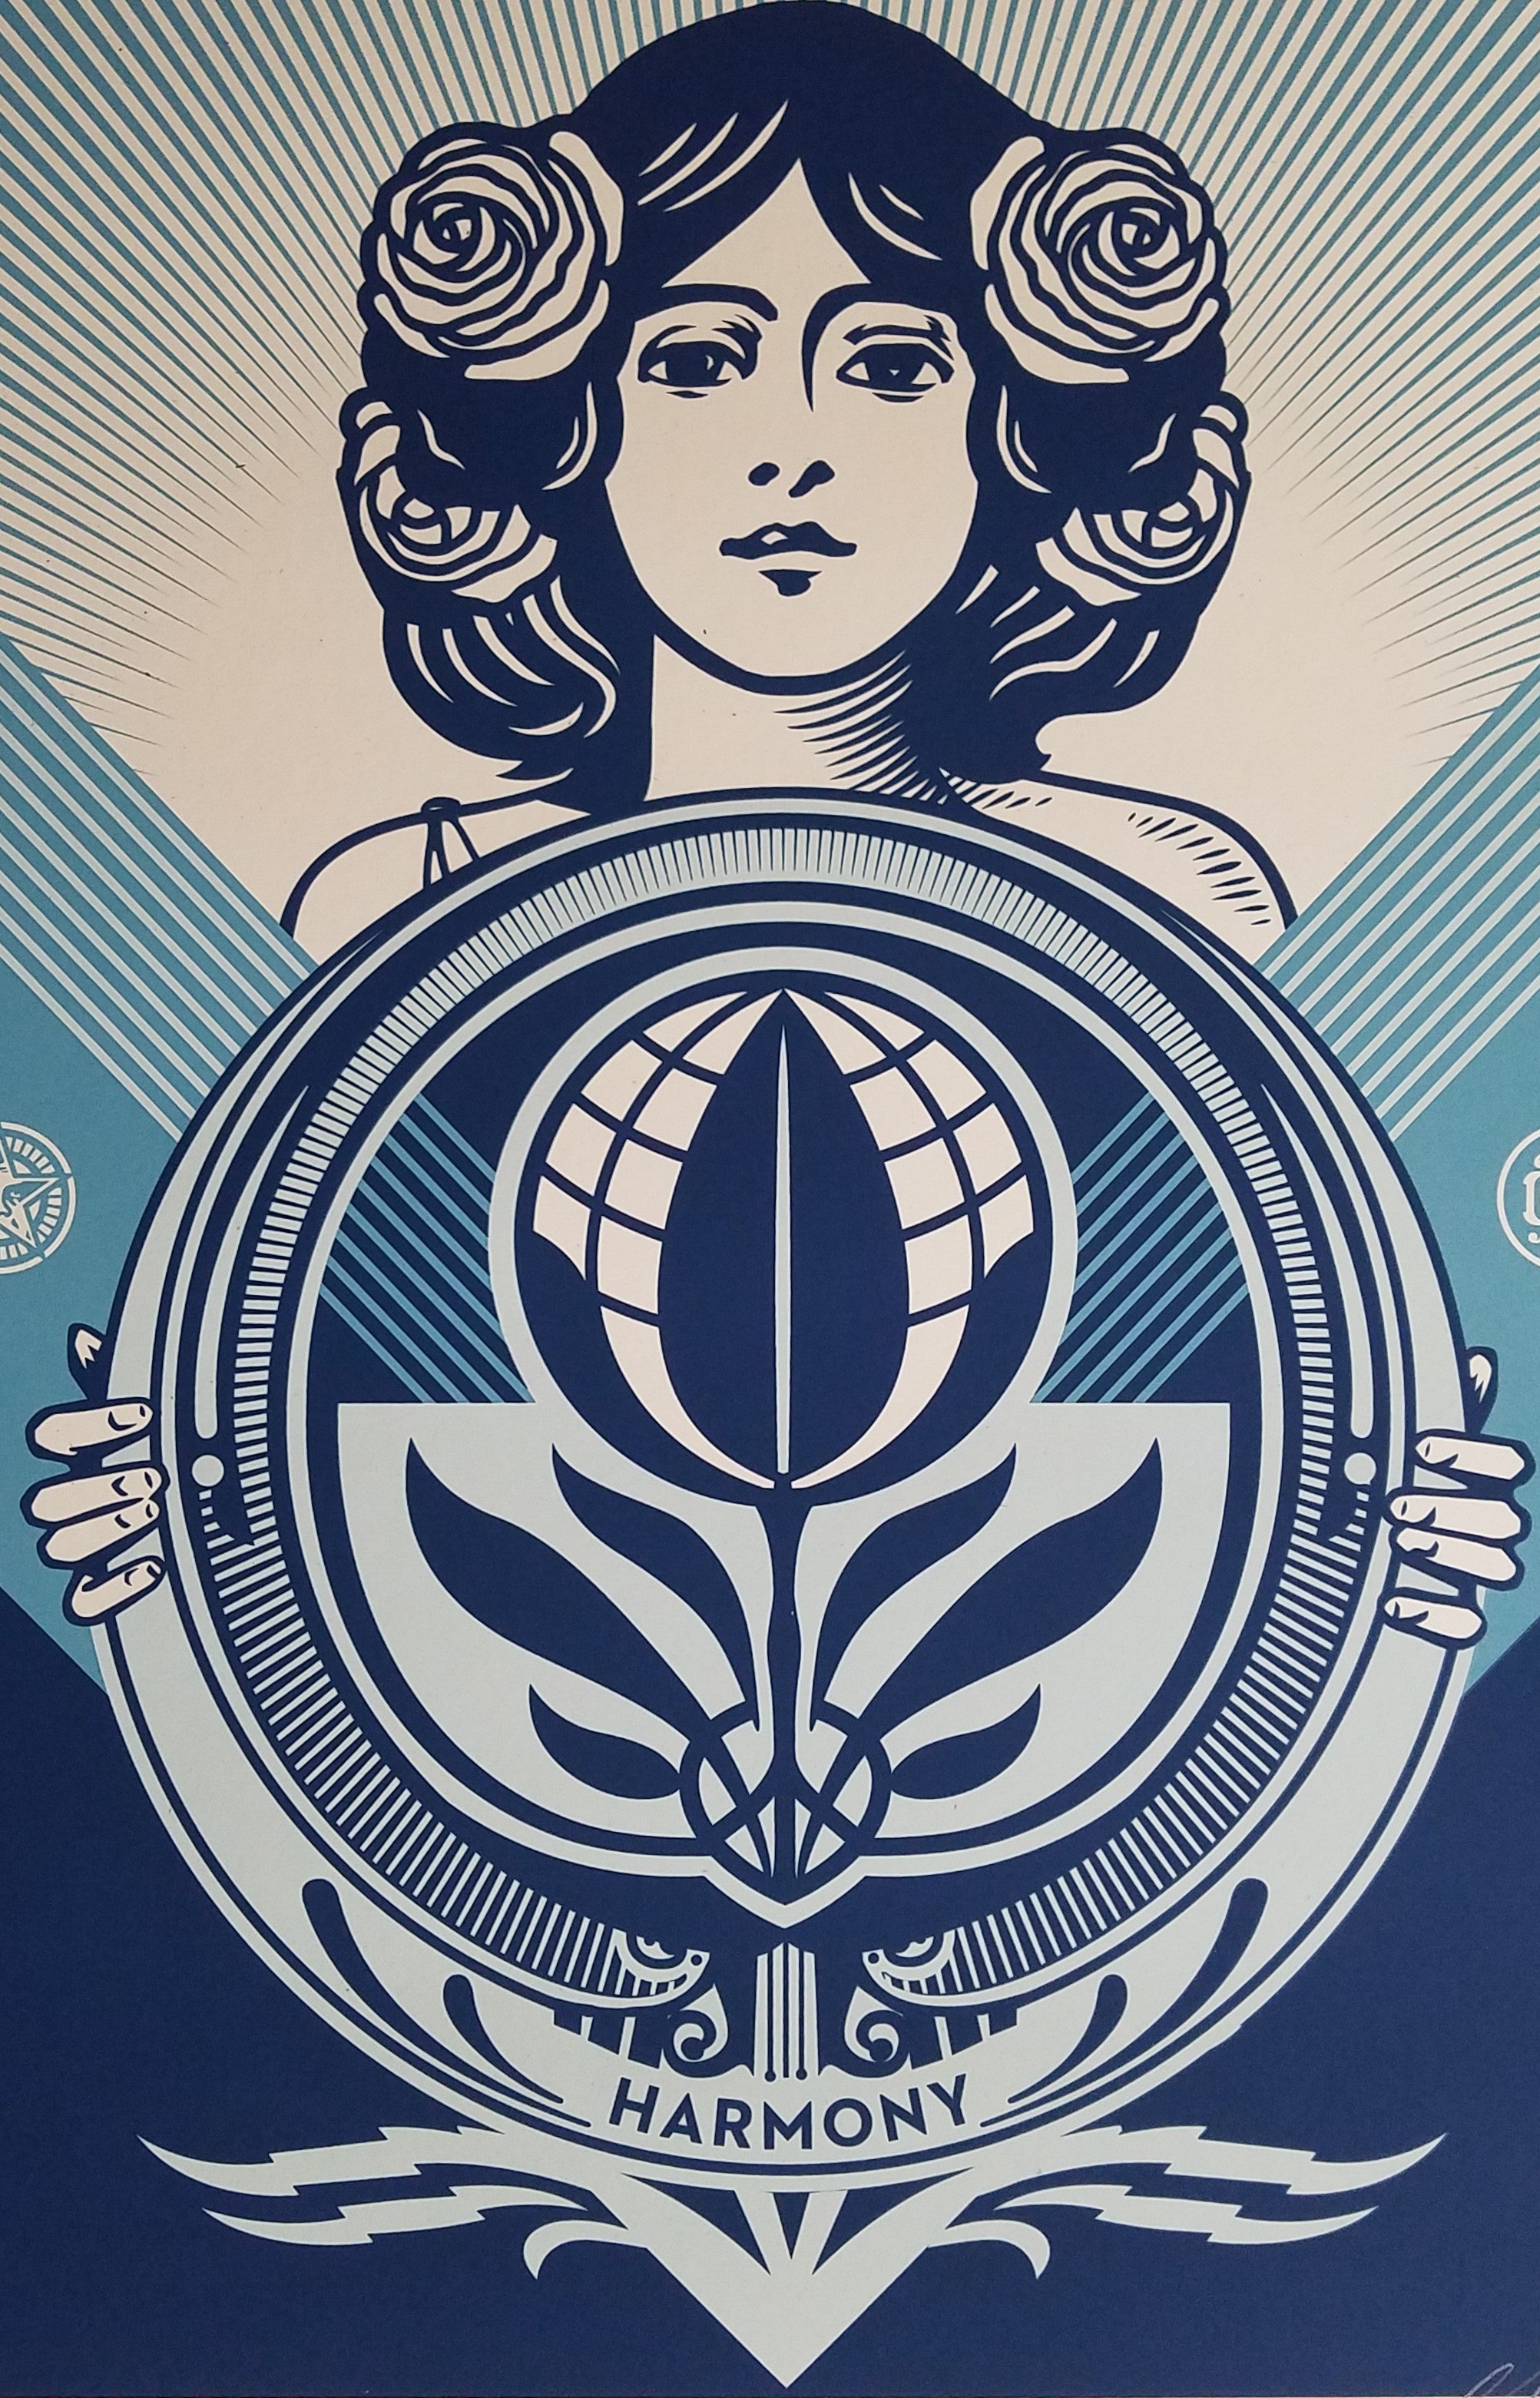 Title: Protect Biodiversity - Cultivate Harmony - 2021  Artist: Shepard Fairey  Edition: Limited Edition Screenprint Poster xx/500, signed and numbered by the artist  Type: OBEY Giant Screen Print poster  Size: 18" x 24"